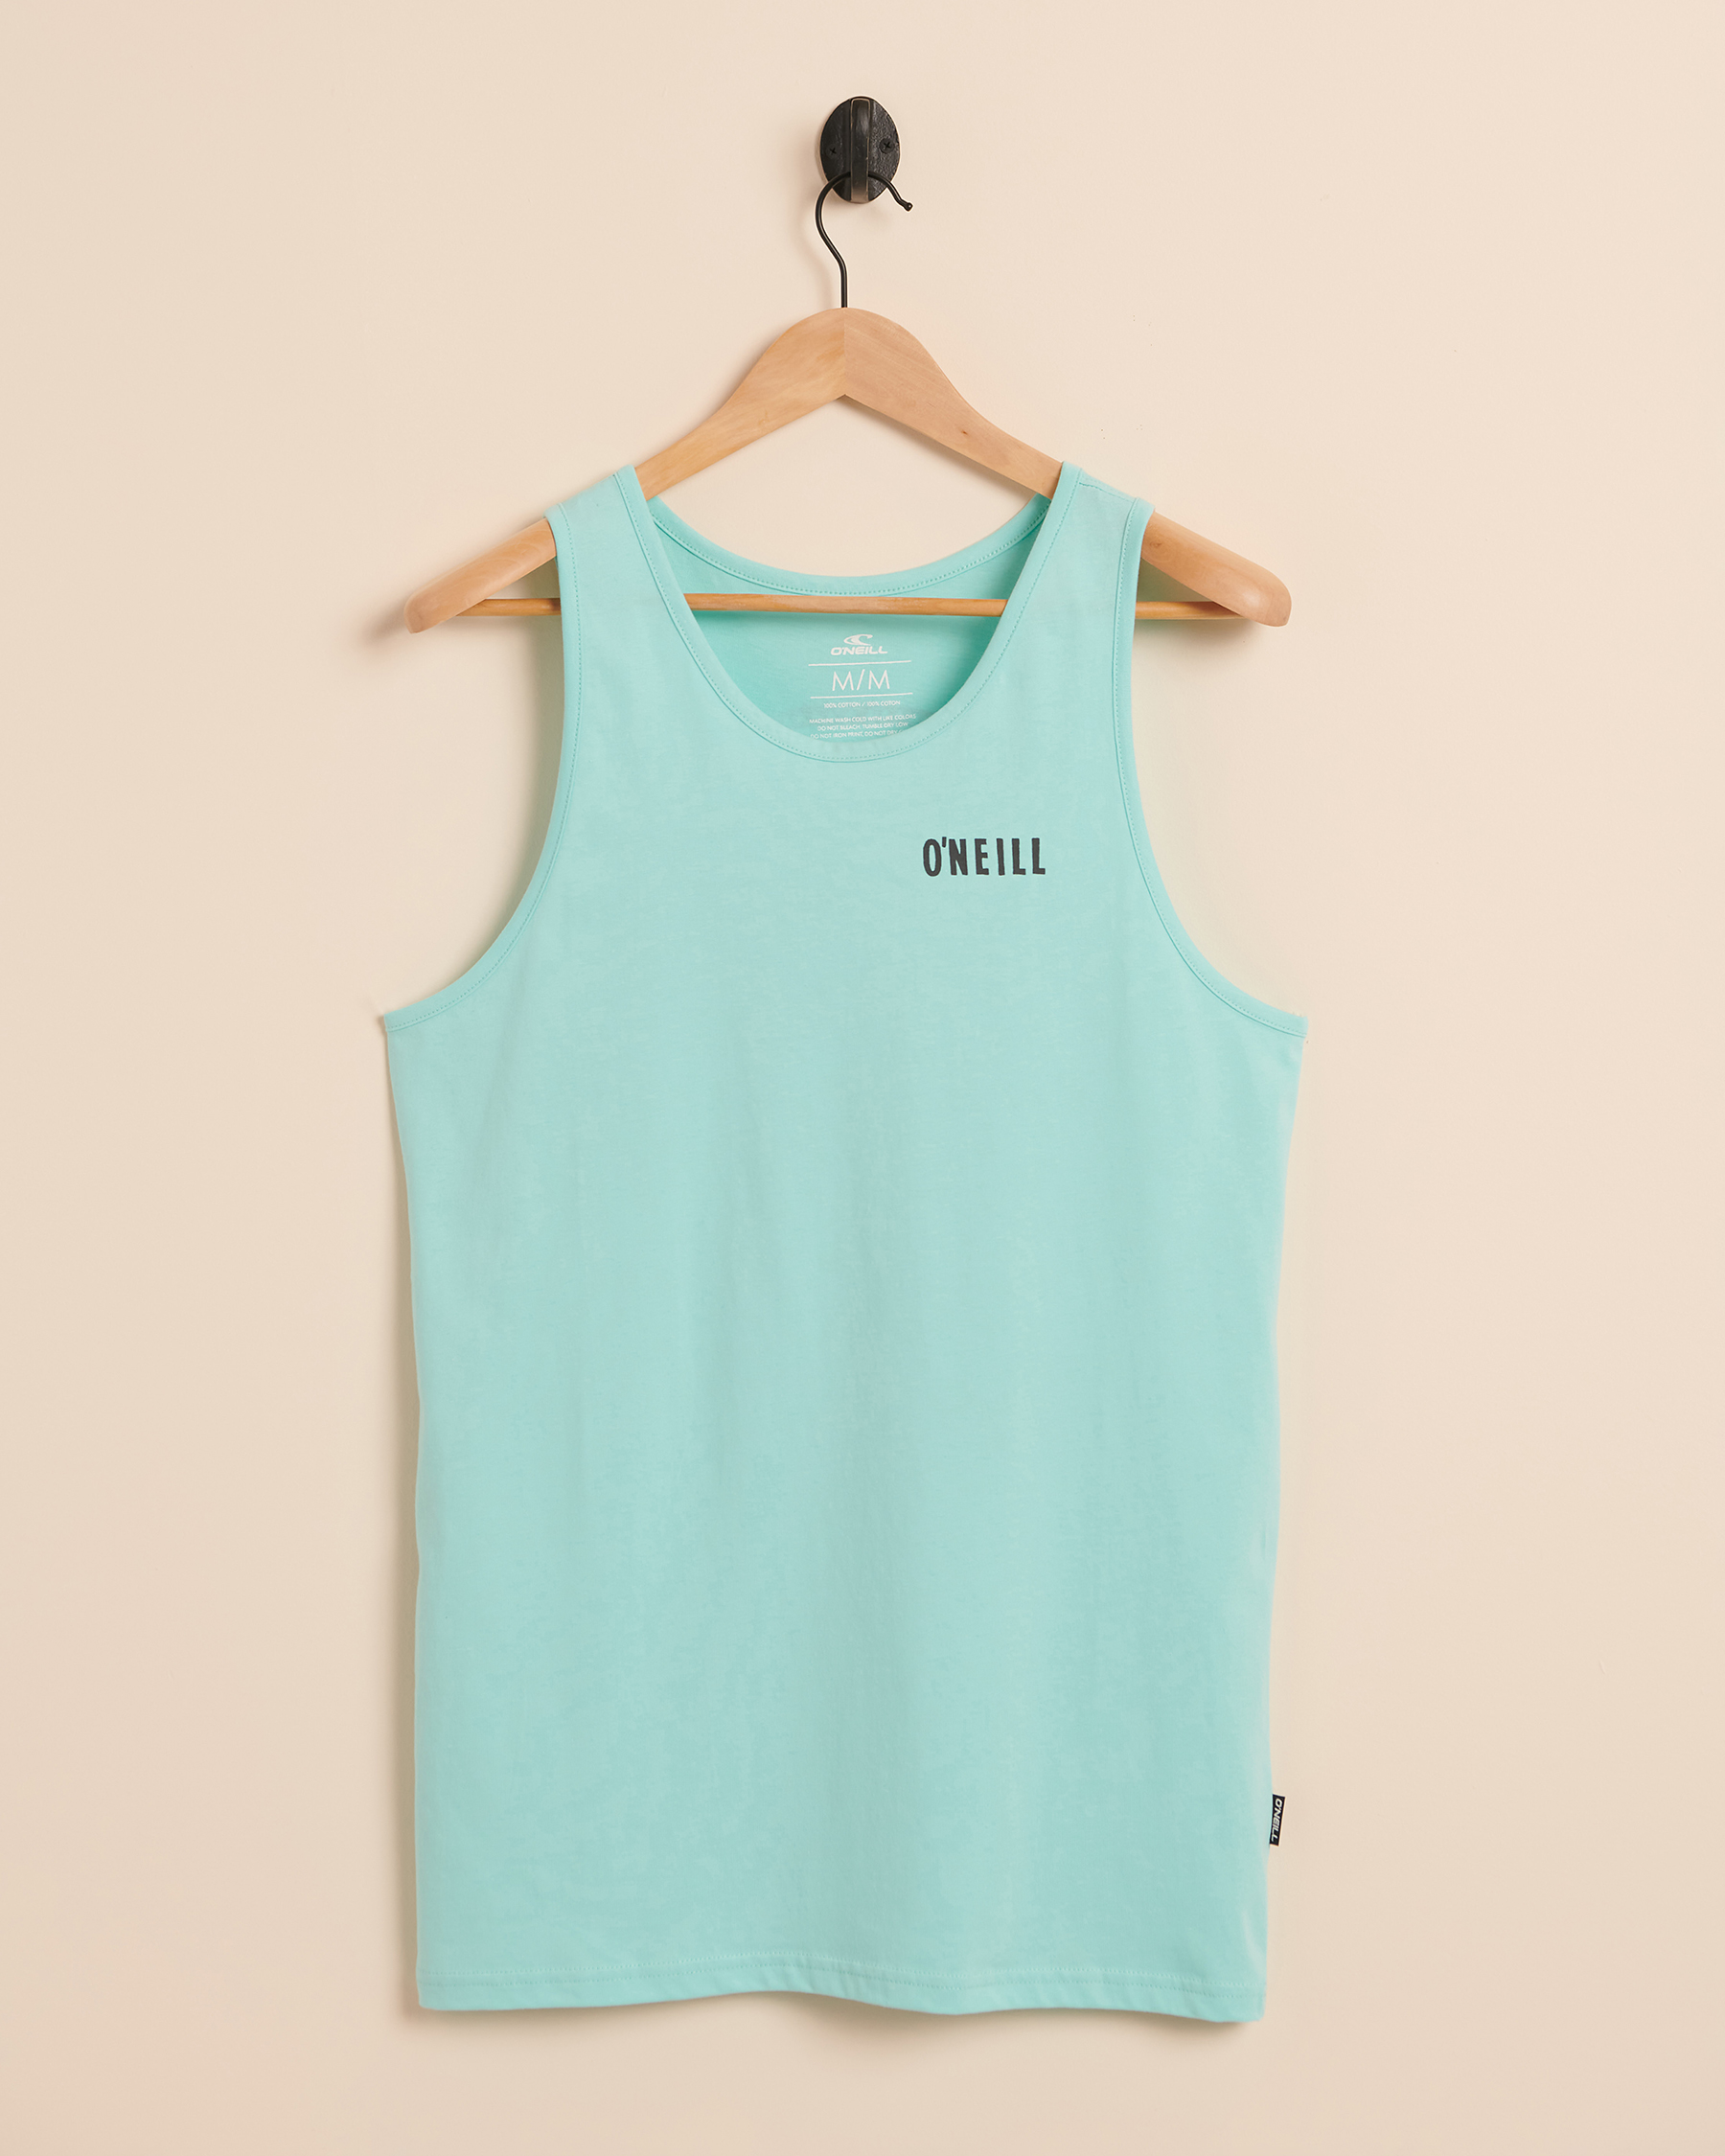 O'NEILL Castoff Tank Top Turquoise SU3118211 - View1